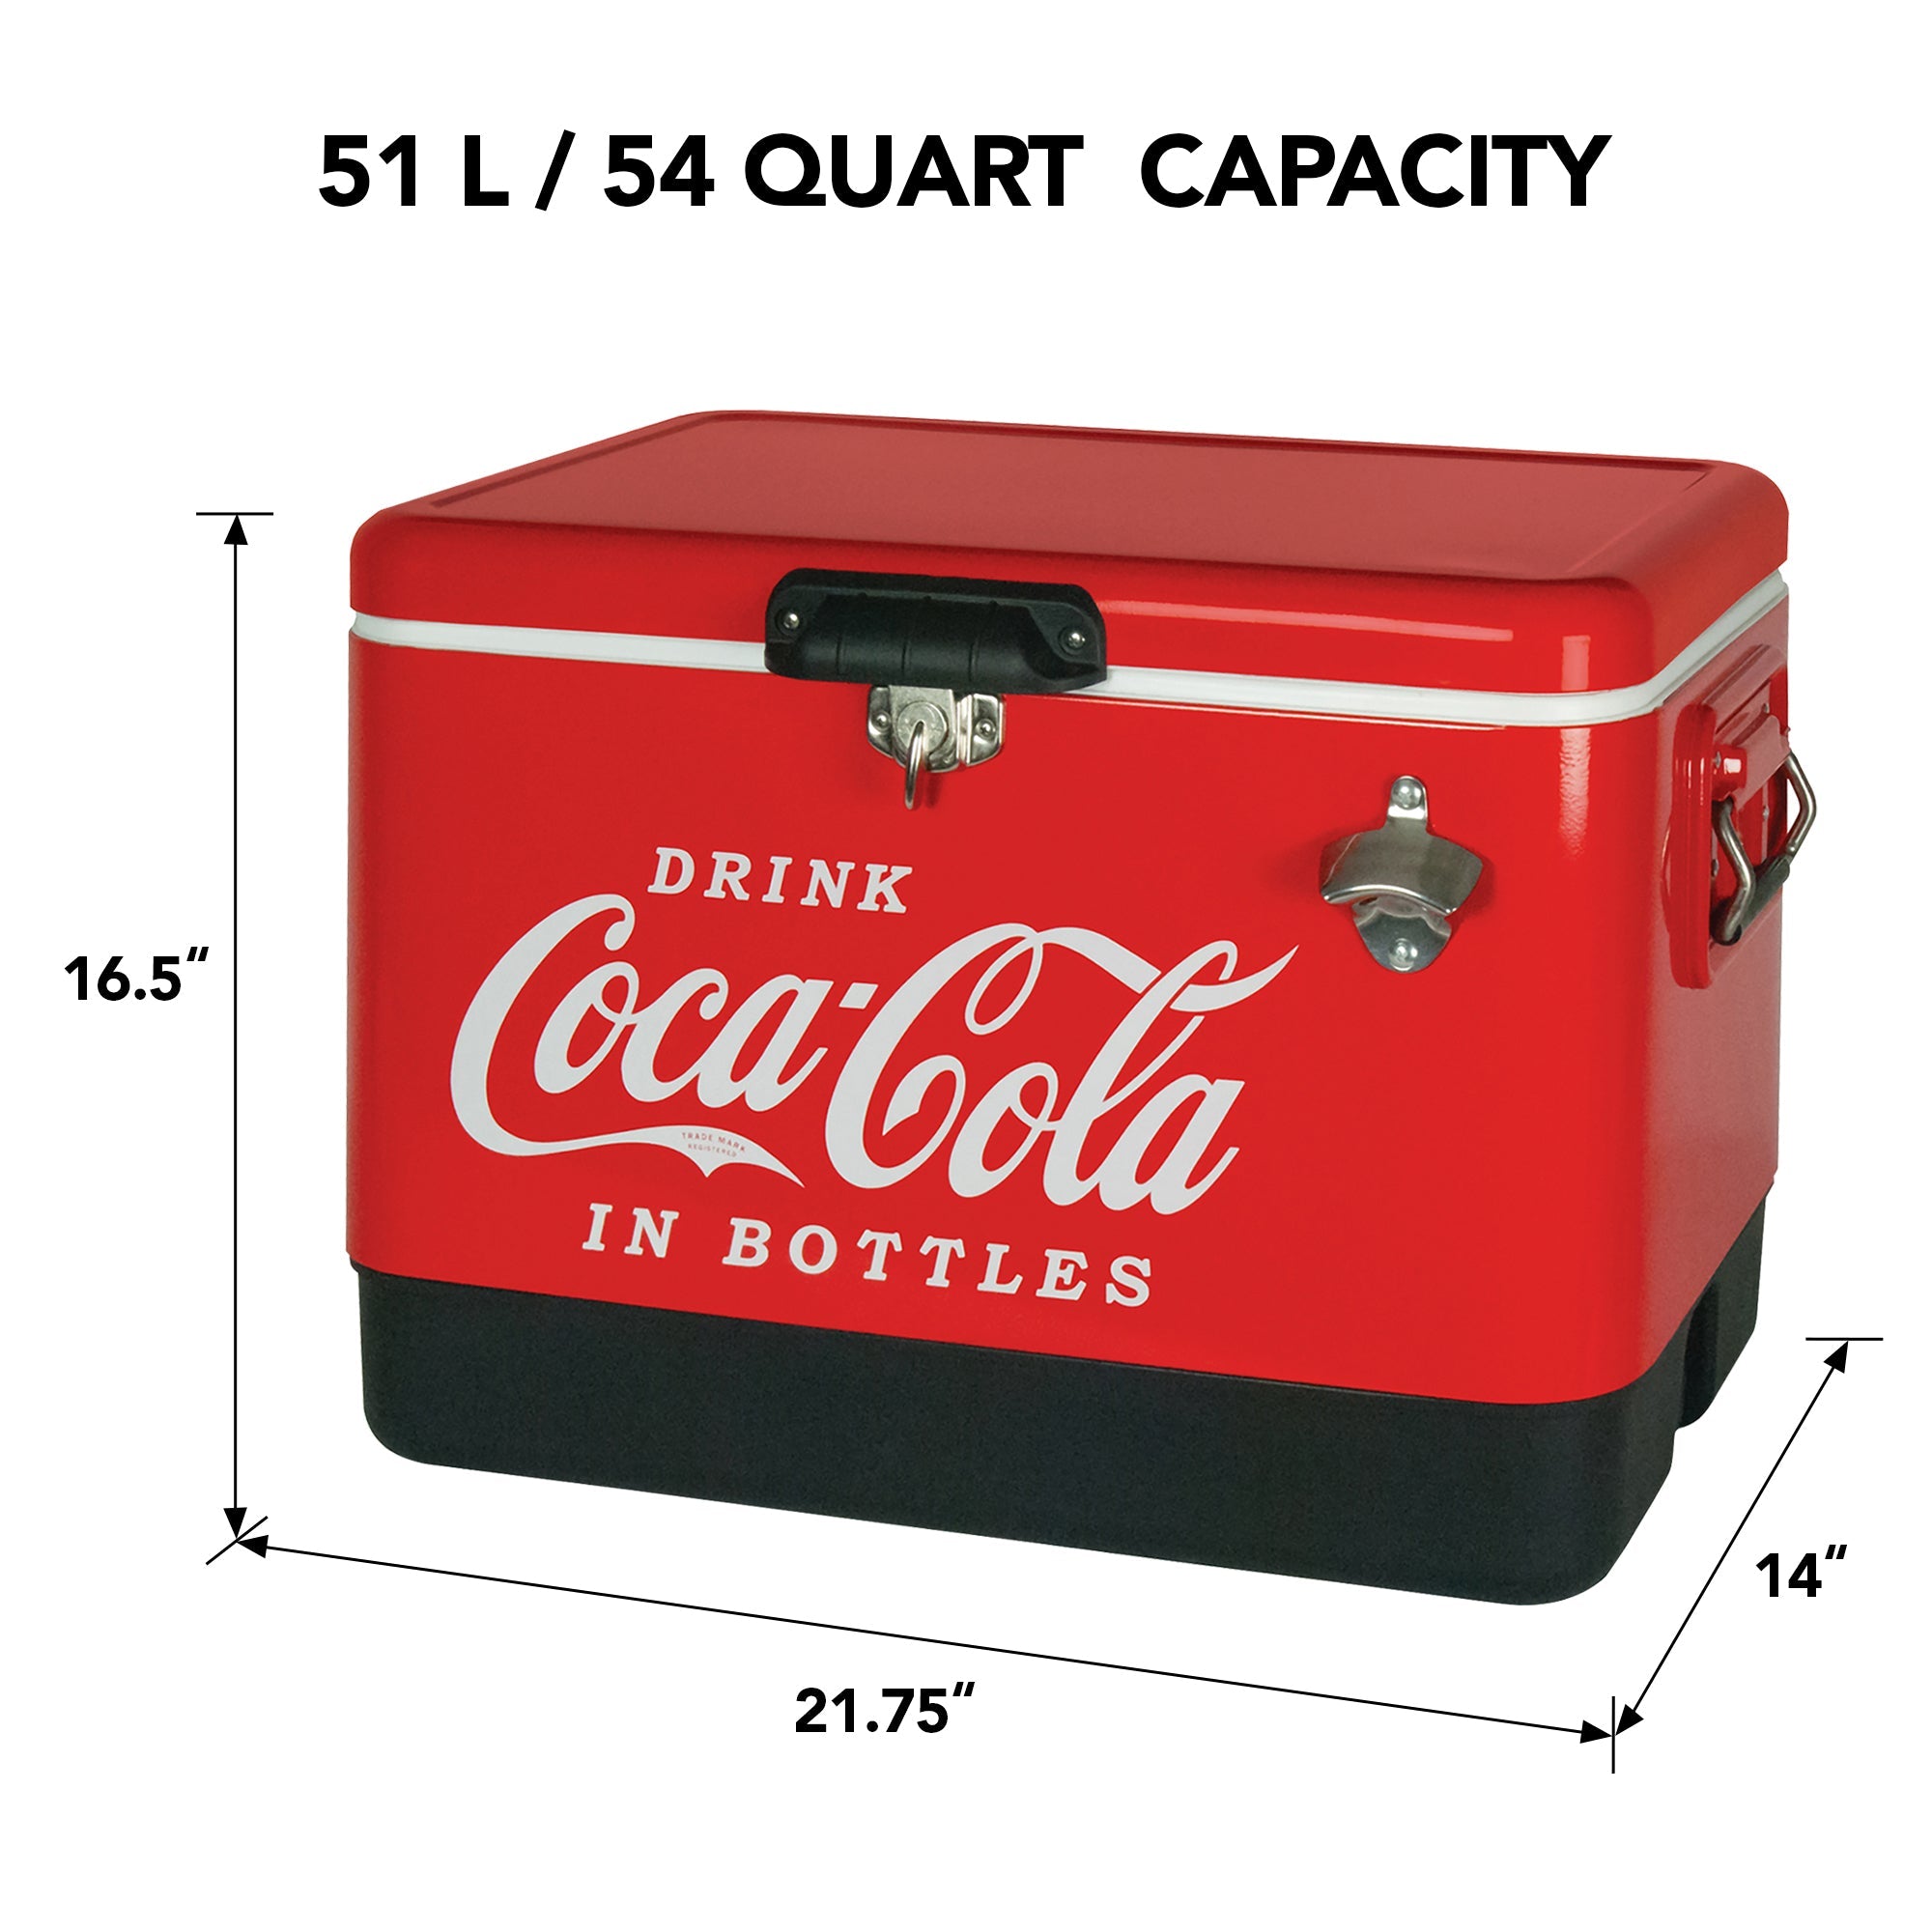 Product shot of Coca-Cola 51 liter ice chest with bottle opener, closed, on a white background, with dimensions labeled. Text above reads, "51L/54 quart capacity"